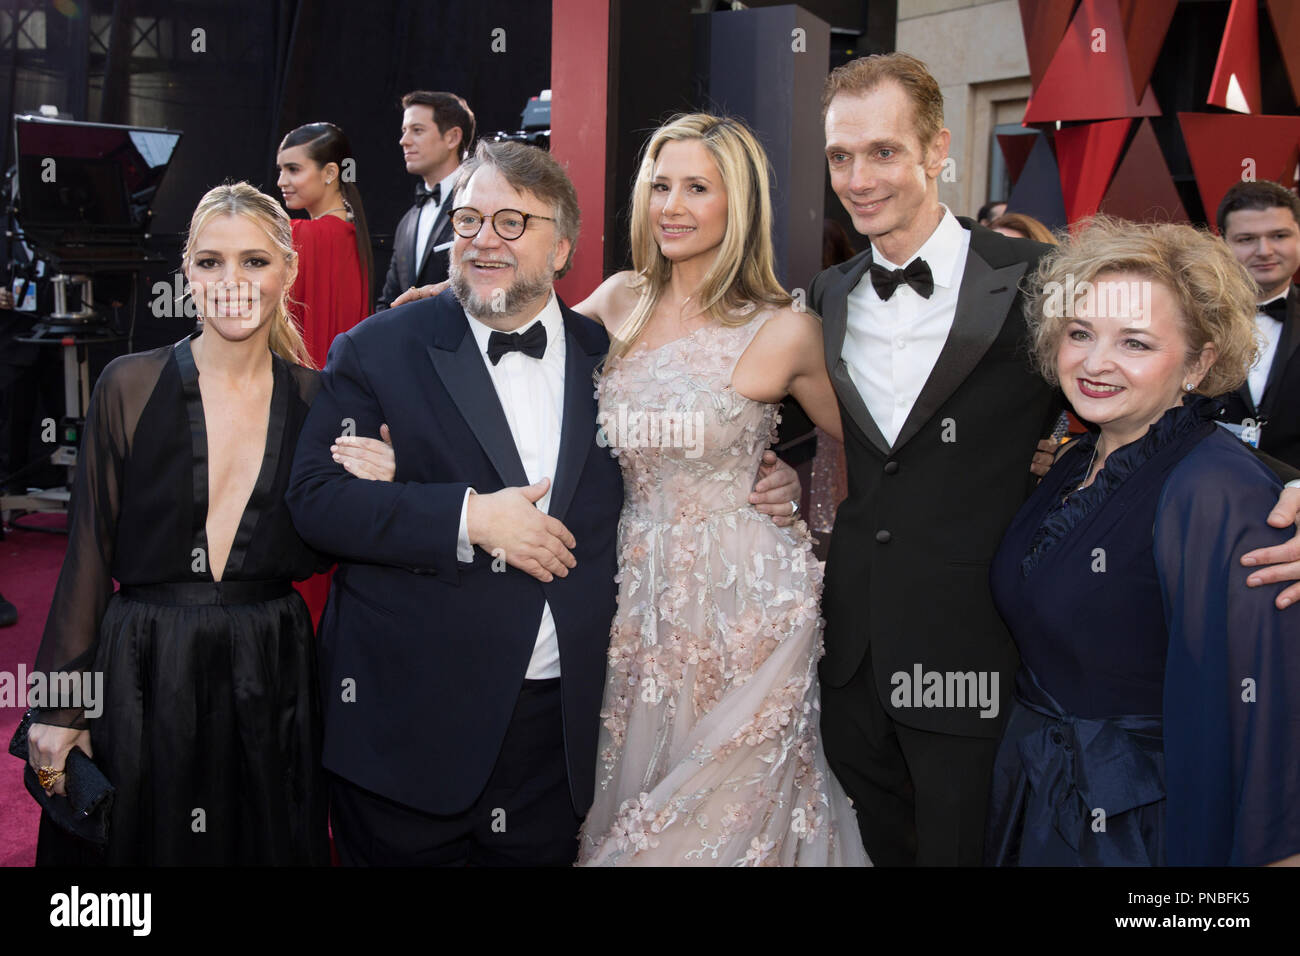 (Left to Right) Guest, Oscar® nominee Guillermo del Toro, Mira Sorvino, Doug Jones and guest arrive on the red carpet of The 90th Oscars® at the Dolby® Theatre in Hollywood, CA on Sunday, March 4, 2018.  File Reference # 33546 799PLX  For Editorial Use Only -  All Rights Reserved Stock Photo